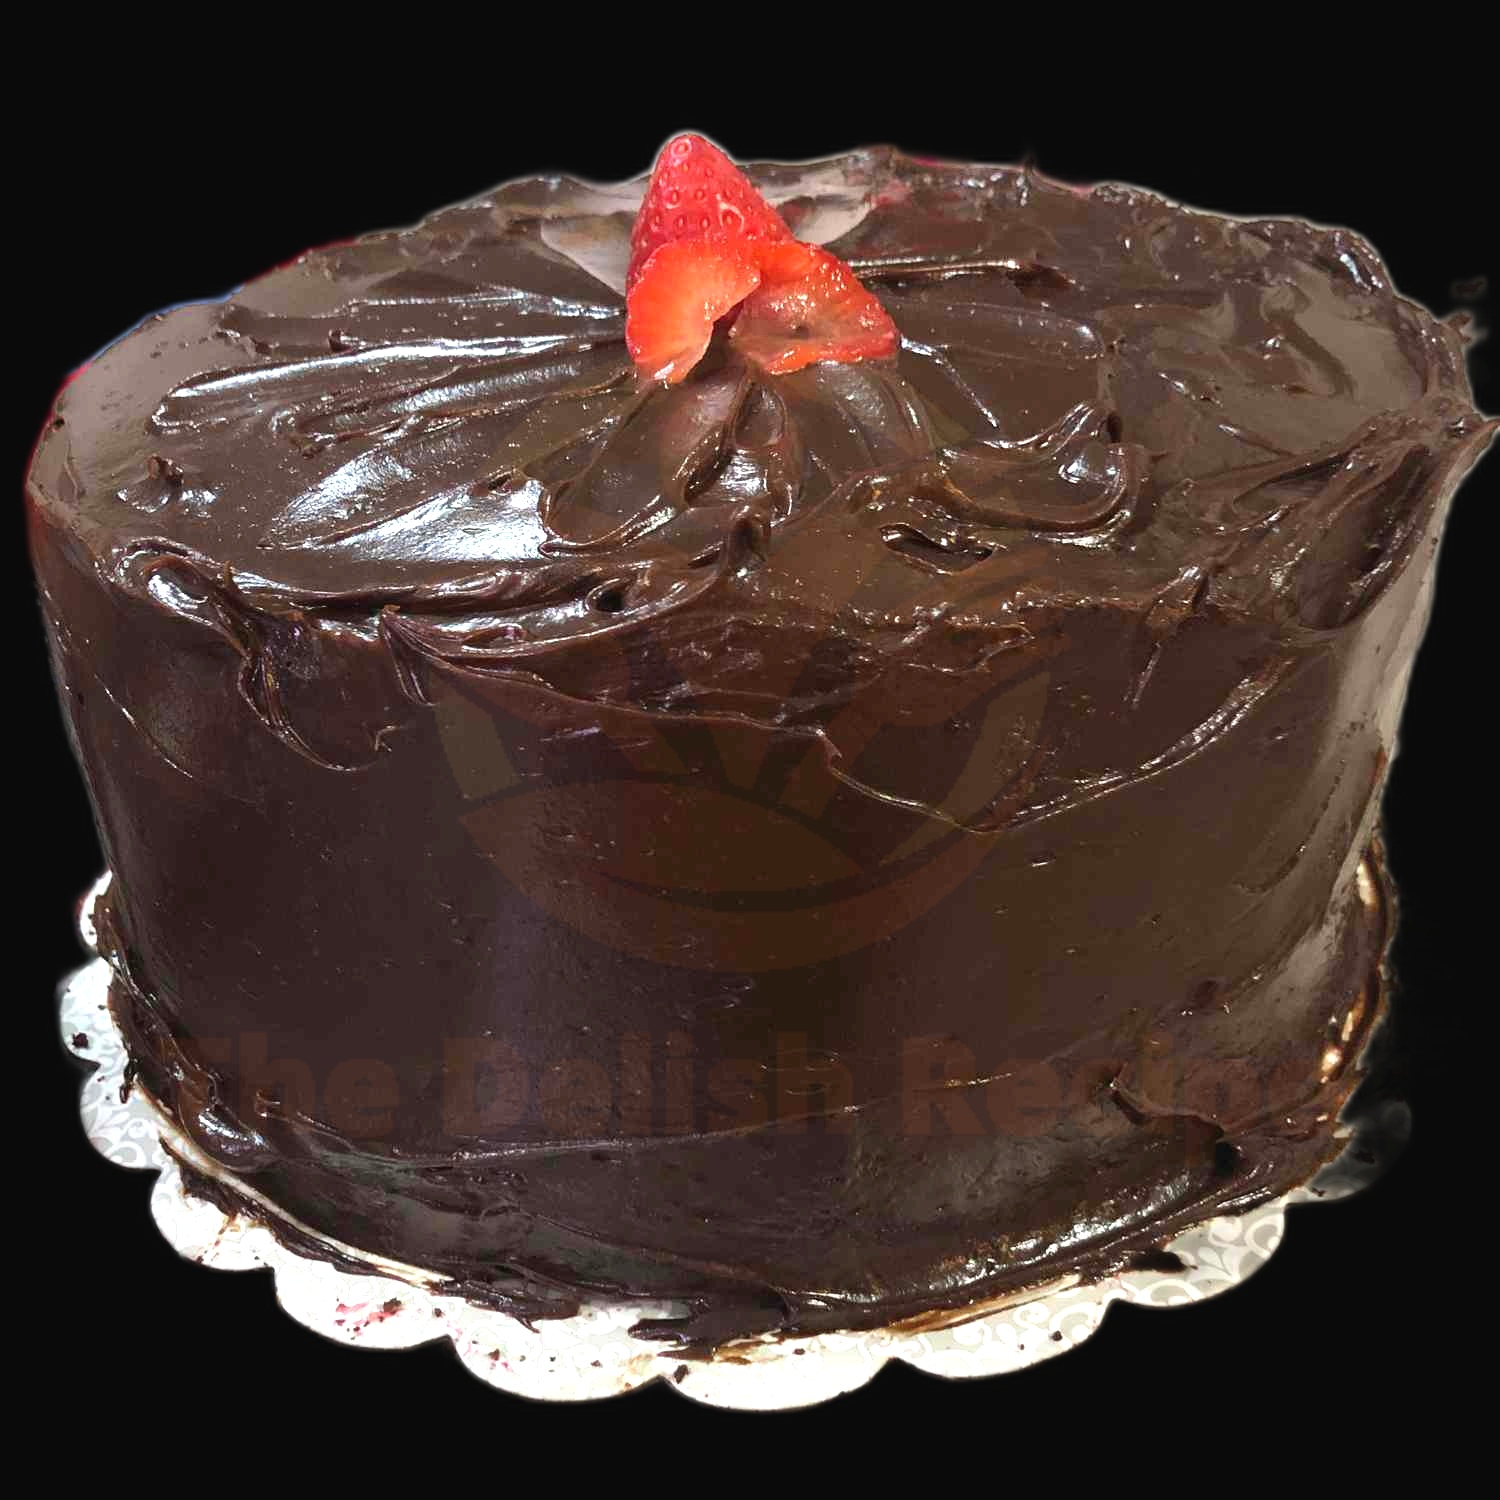 Chocolate Cake with Raspberry Filling